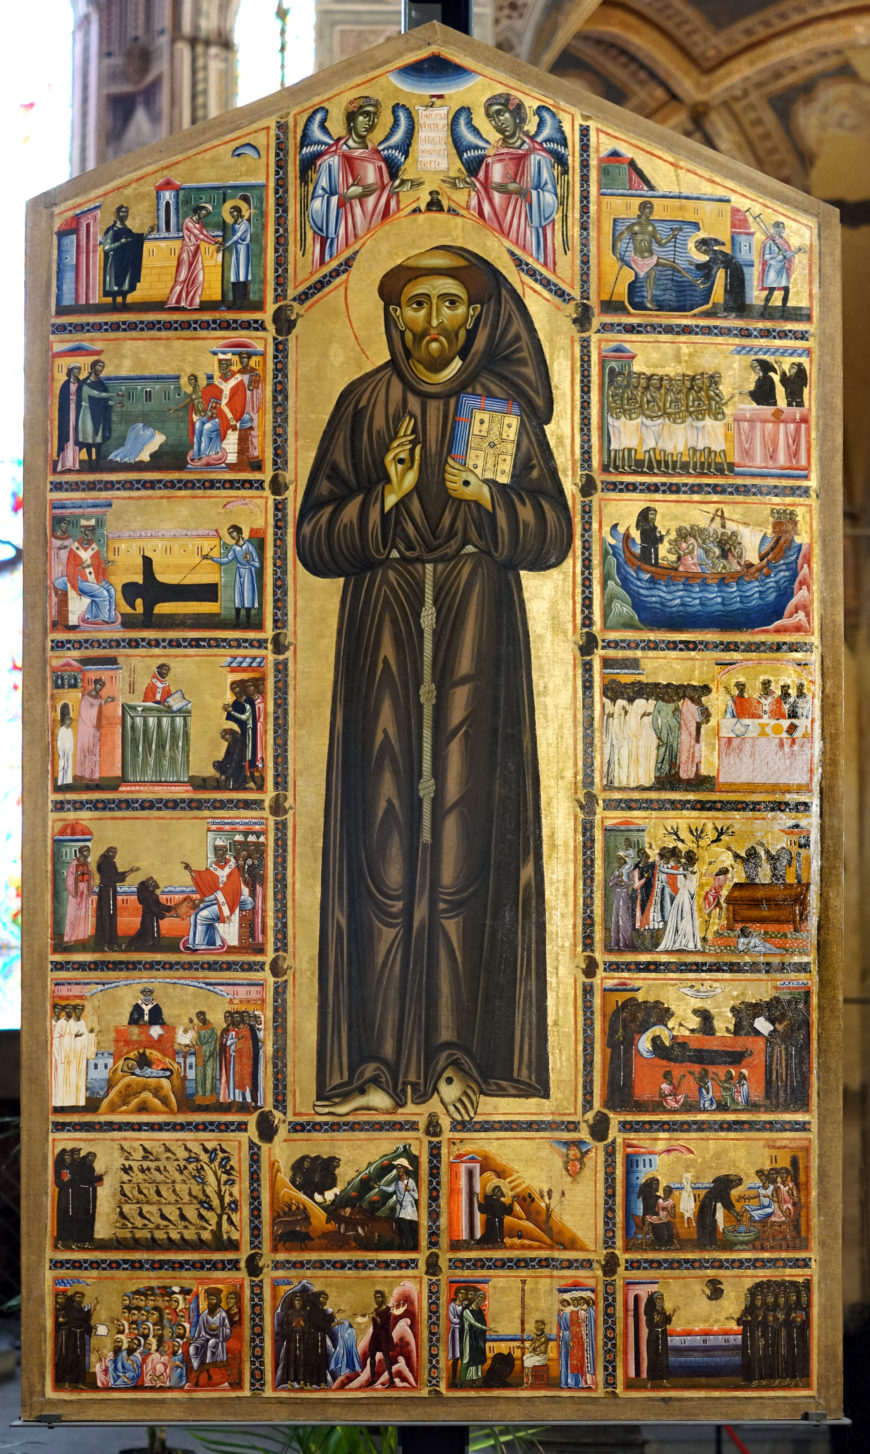 Master of the Bardi Saint Francis, Altarpiece with scenes from the life of Saint Francis of Assisi (Bardi Dossal), c. mid 13th century, tempera on panel, Bardi Chapel, Basilica of Santa Croce, Florence (photo: Steven Zucker, CC BY-NC-SA 2.0)